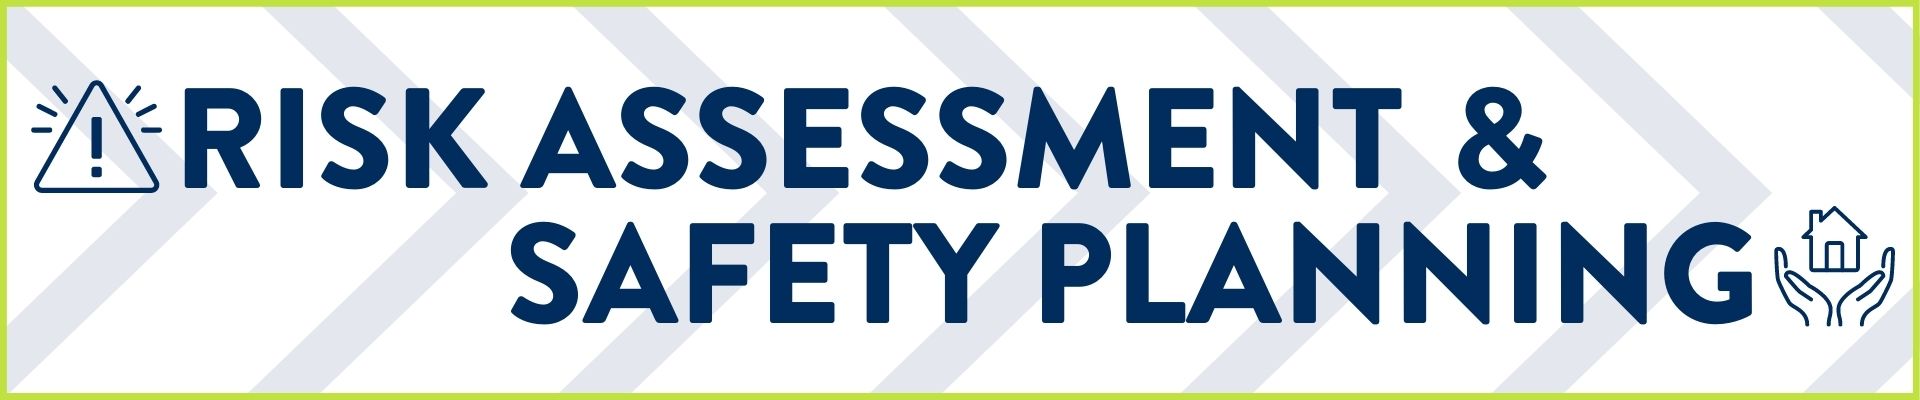 header that says "risk assessment and safety planning"